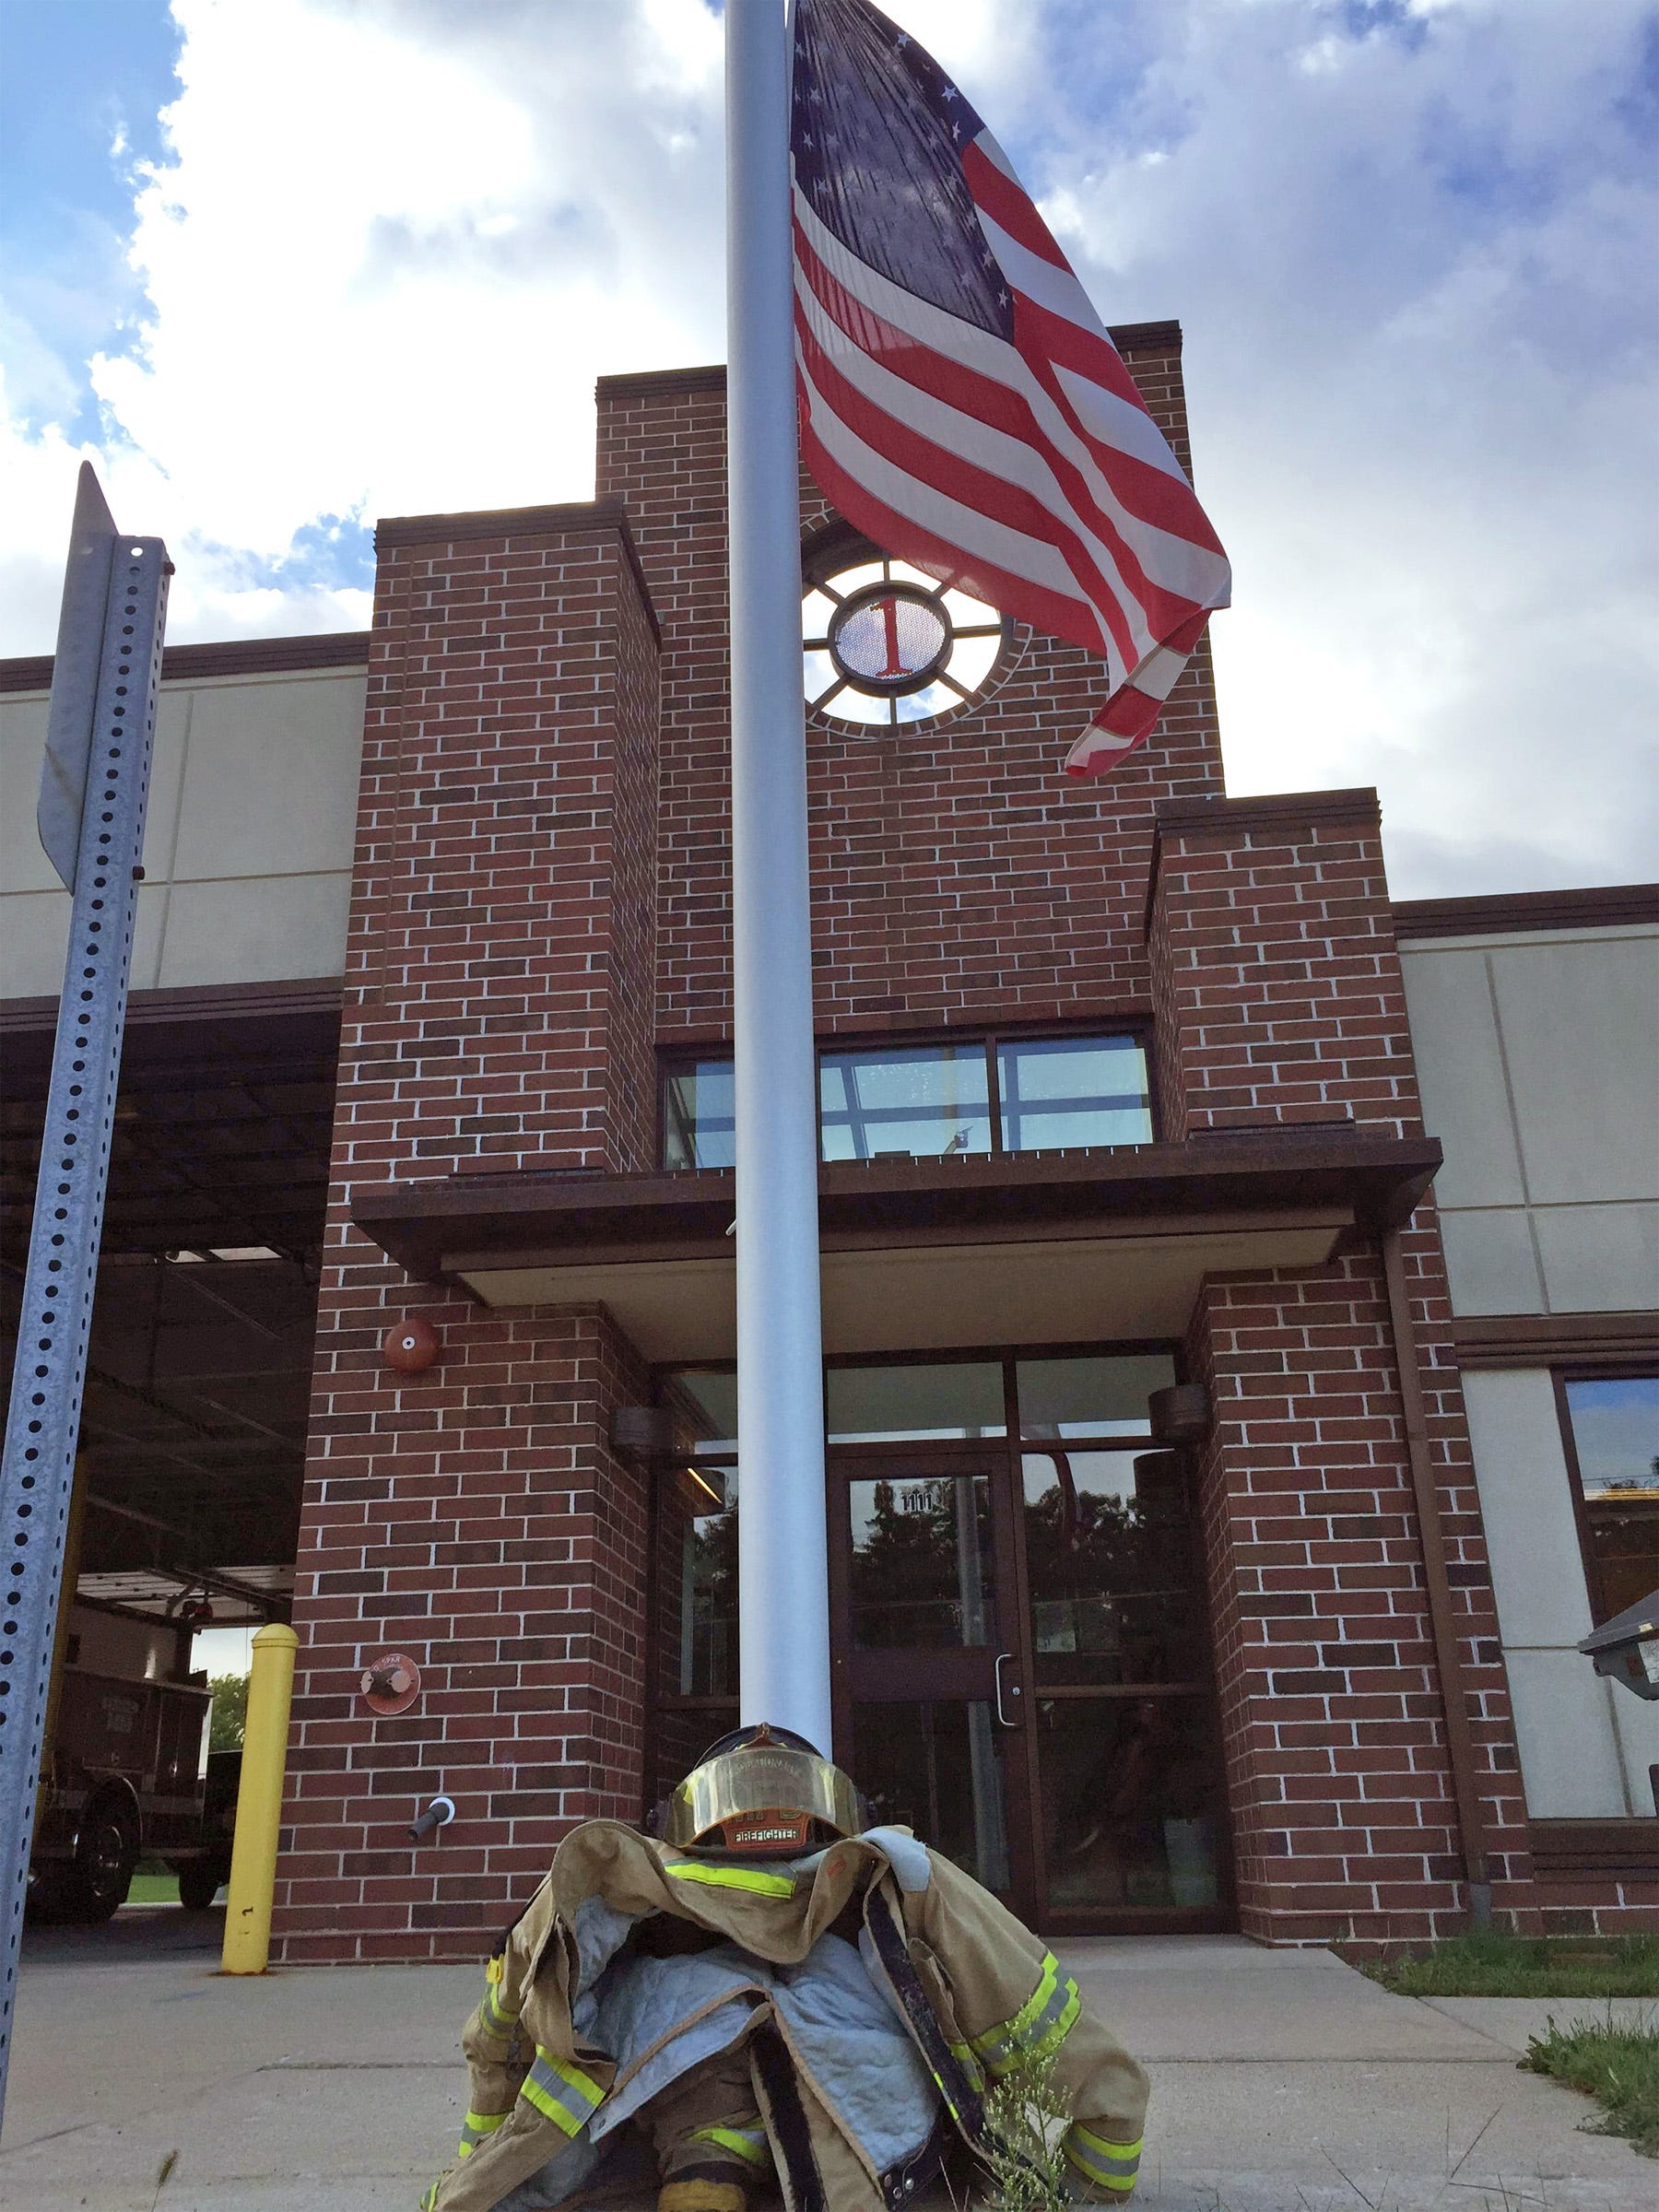 Gear sits in front of a flag at half staff by the Mukwonago Fire Department on Sept. 11. Members of the police and fire departments paused for a moment of silence in honor of those who lost their lives on Sept. 11, 2001.